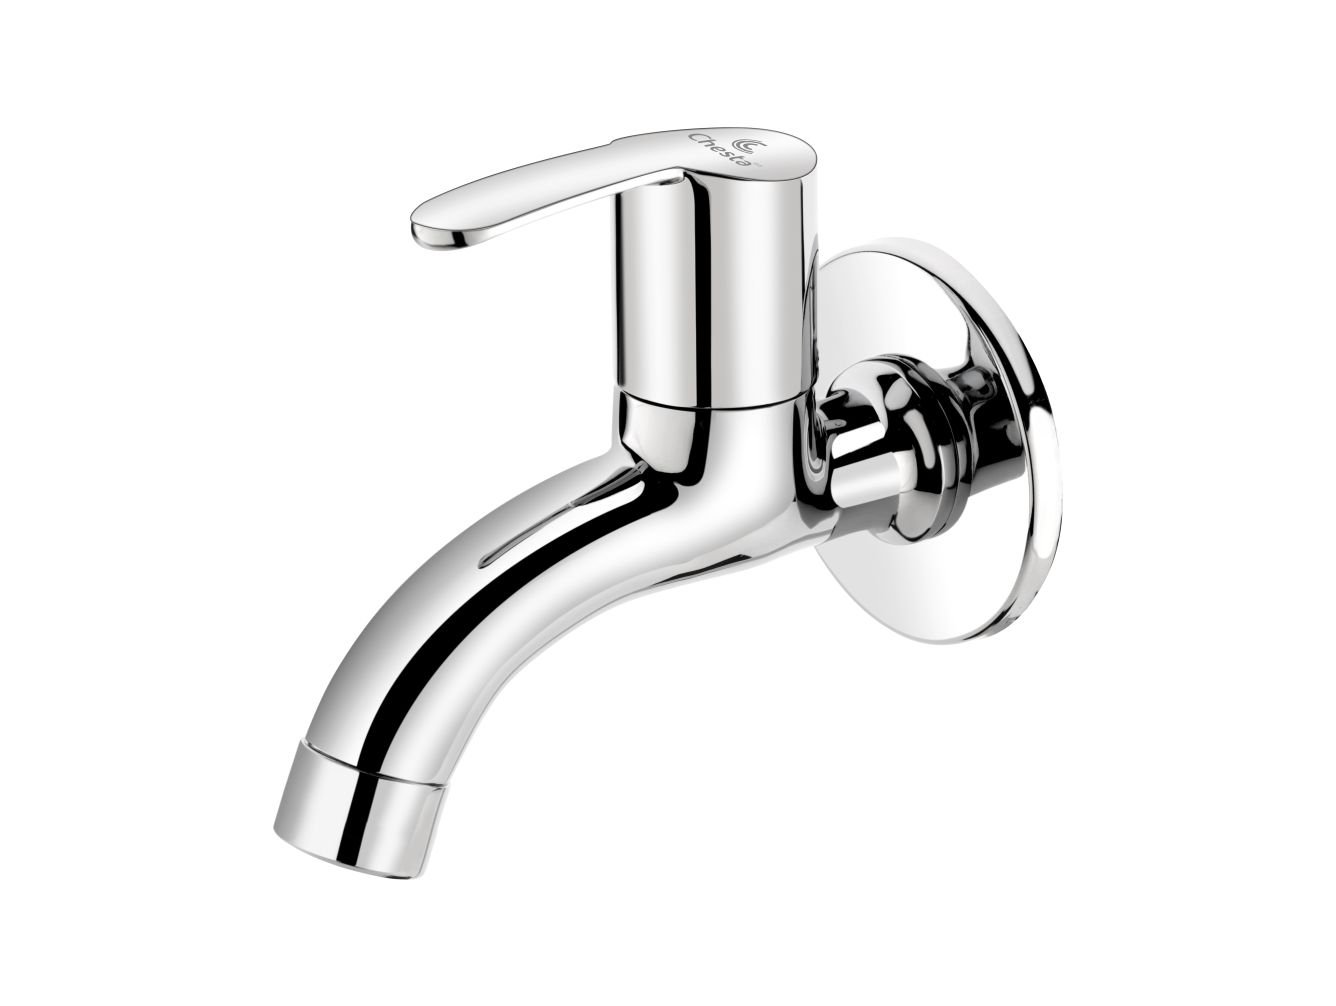 DR - 1001 - Bib Cock with Wall Flange by Chesta Bath